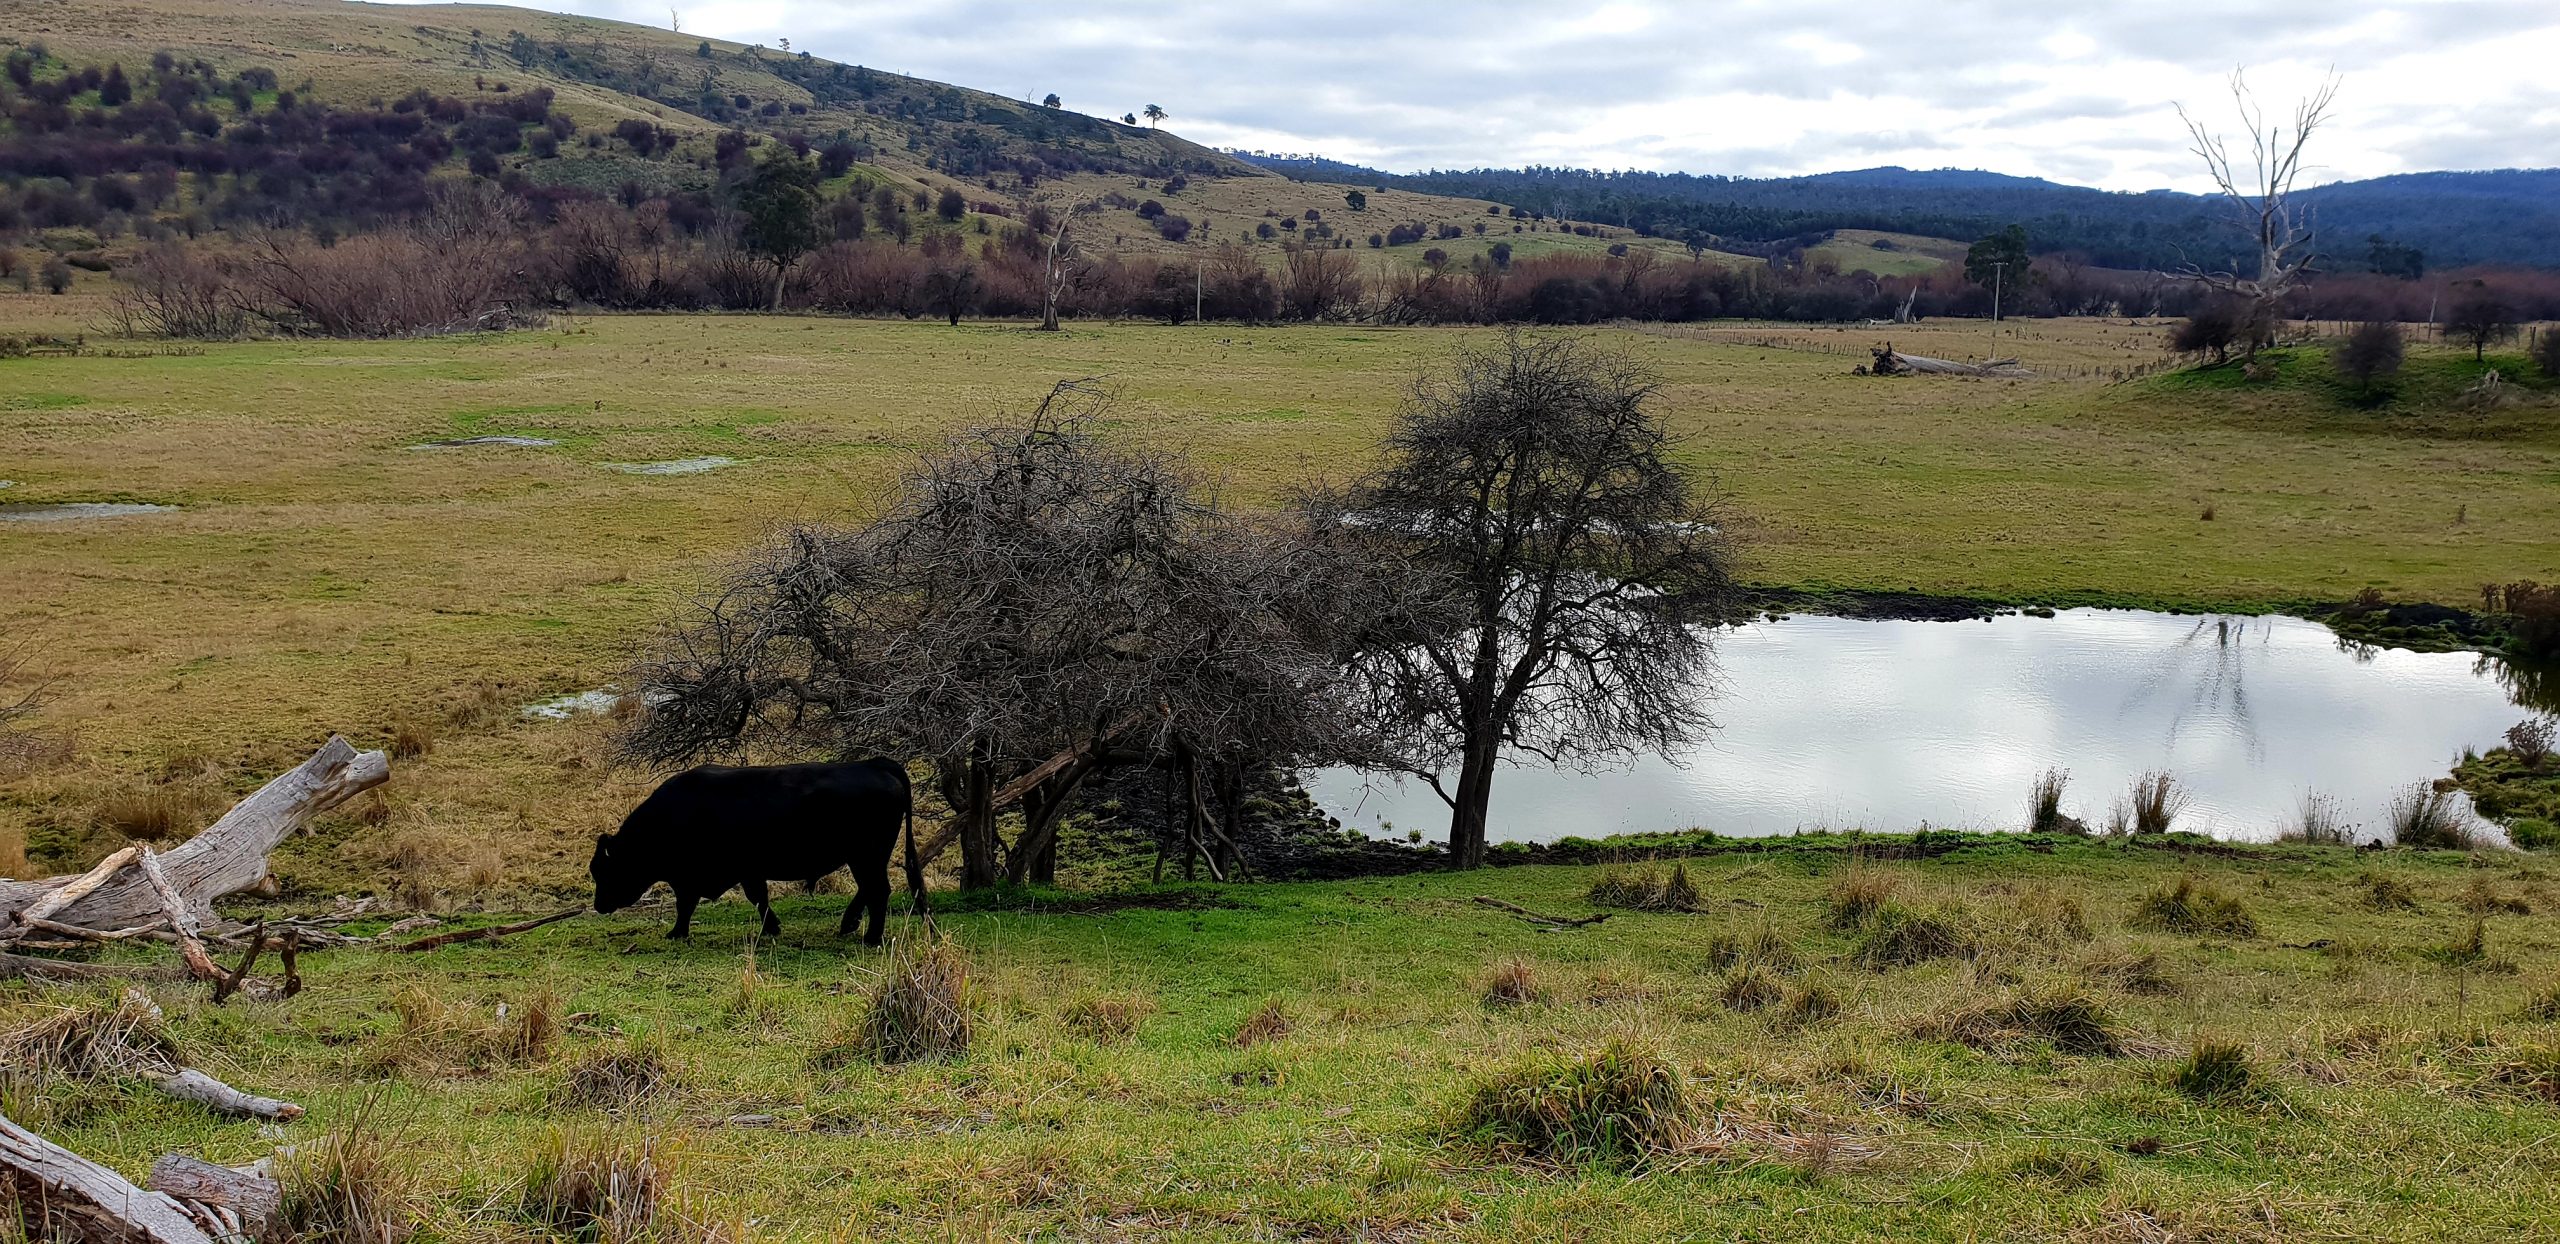 How Tasmanian graziers can prosper on the track to net-zero emissions